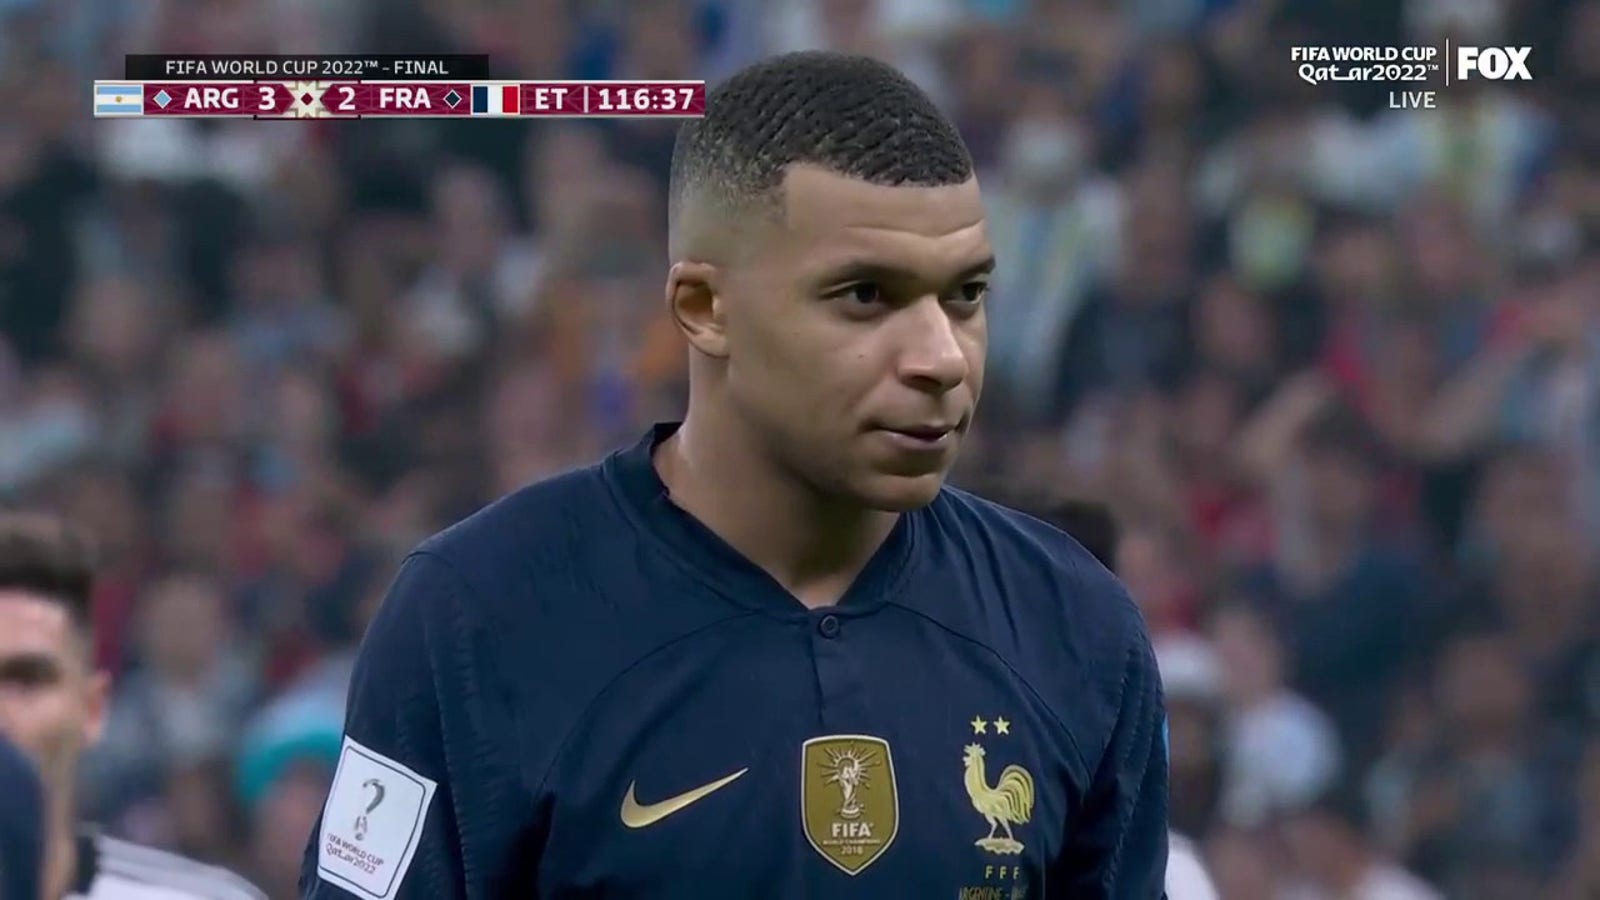 Kylian Mbappé equalizes in the 116th minute